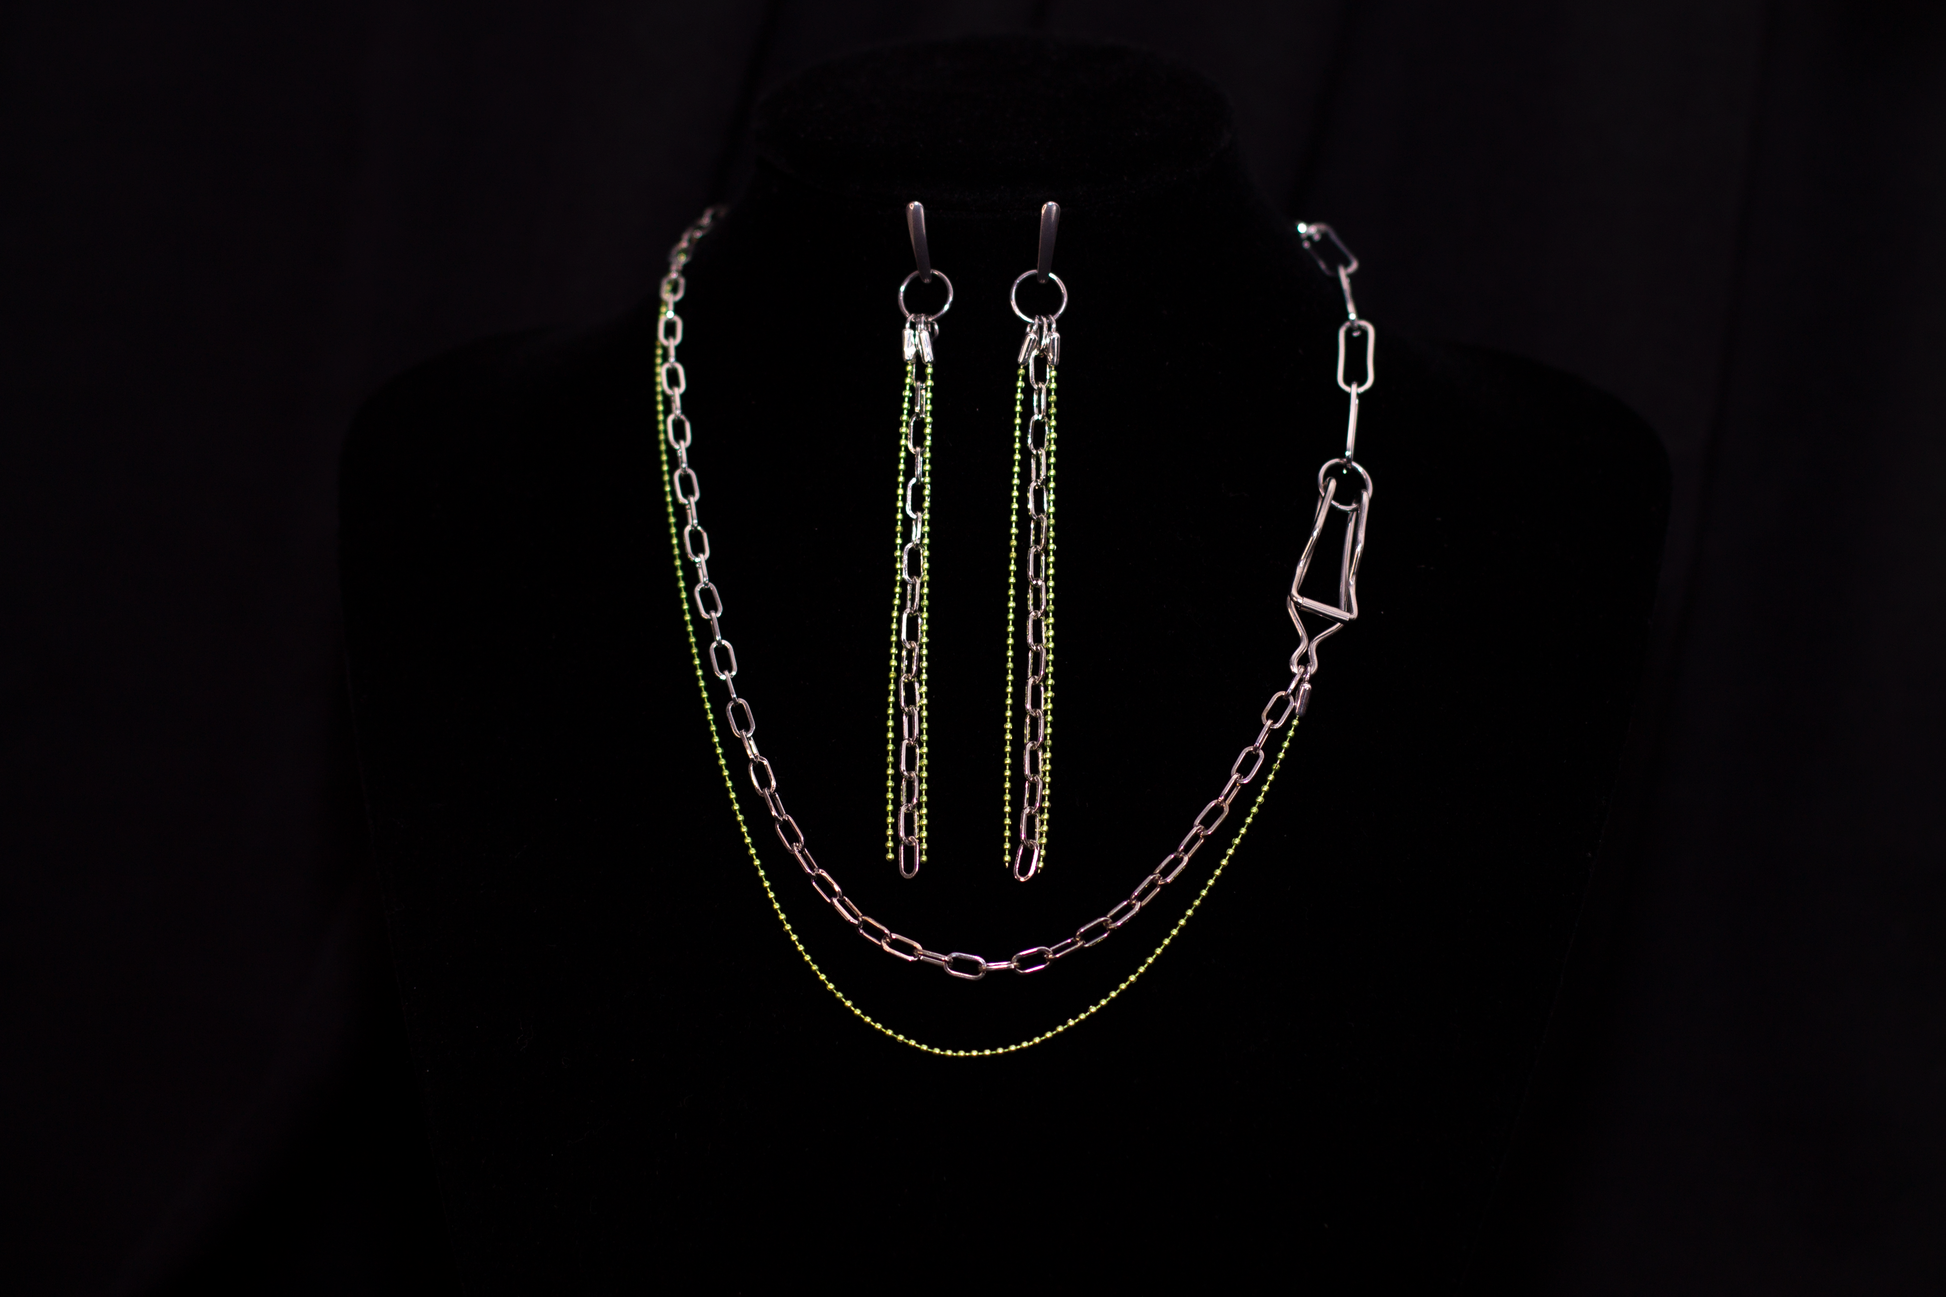 An exquisite Myril Jewels set, featuring neo-gothic long-chain earrings and a matching necklace, perfect for goth and alternative fashion enthusiasts. The silver links are accented with vibrant green beads, encapsulating a gothic-chic vibe. This bold jewelry set serves as a statement piece for rave parties or as a distinct goth girlfriend gift, embodying the whimsigoth and witchcore essence in every detail.